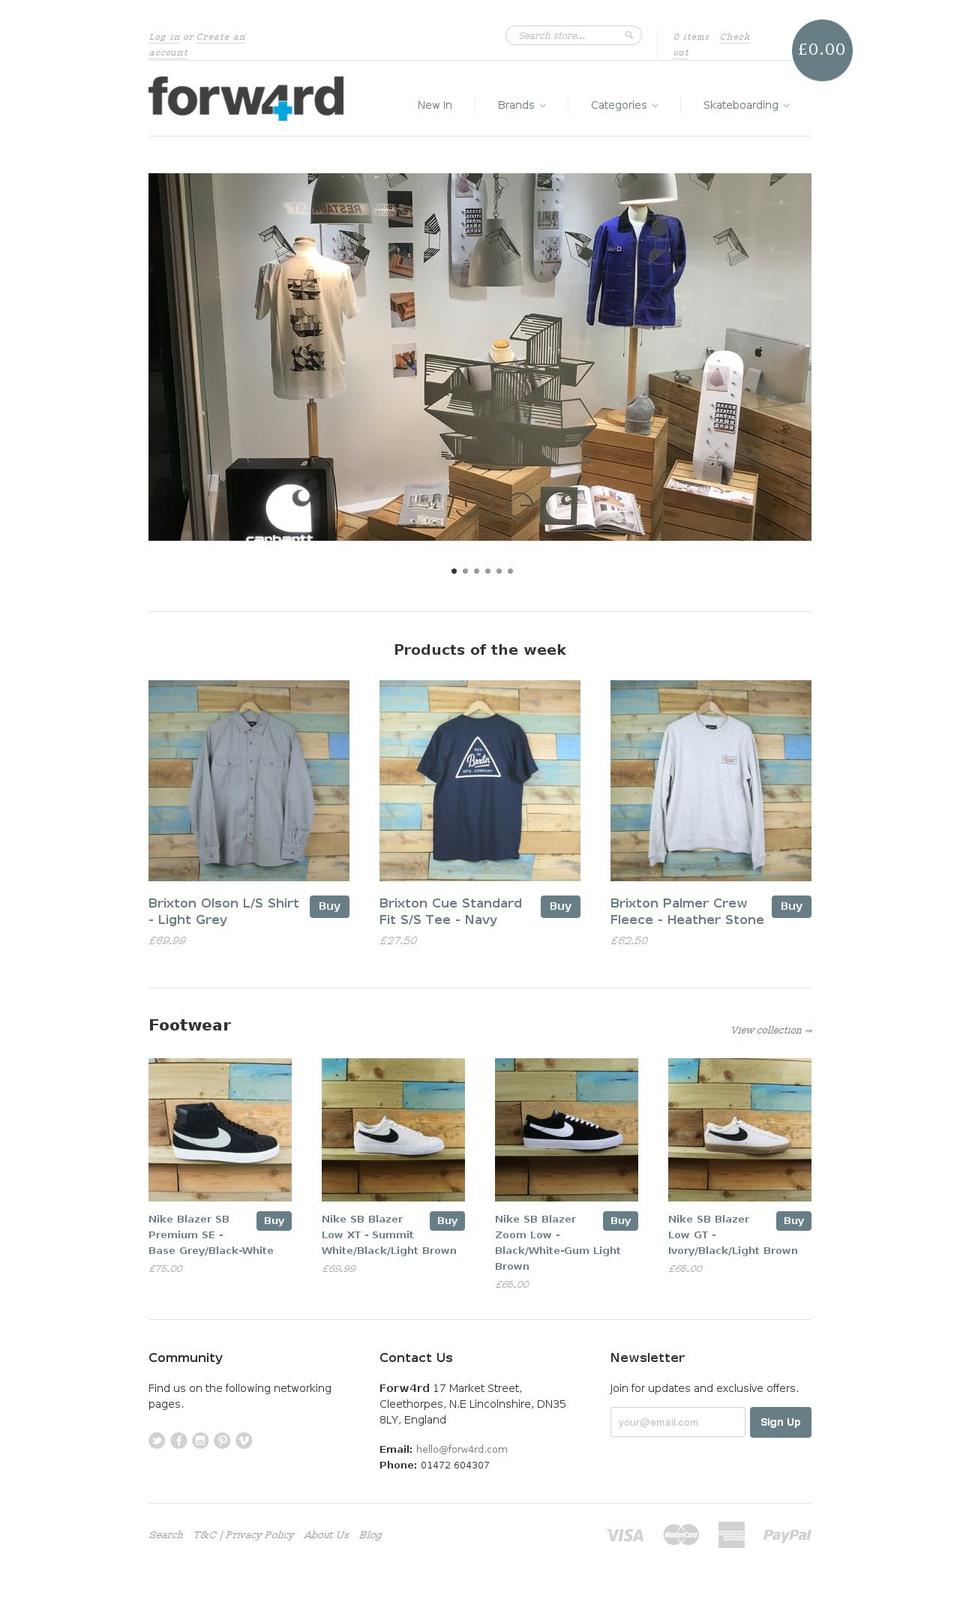 new standard Shopify theme site example forw4rd.com